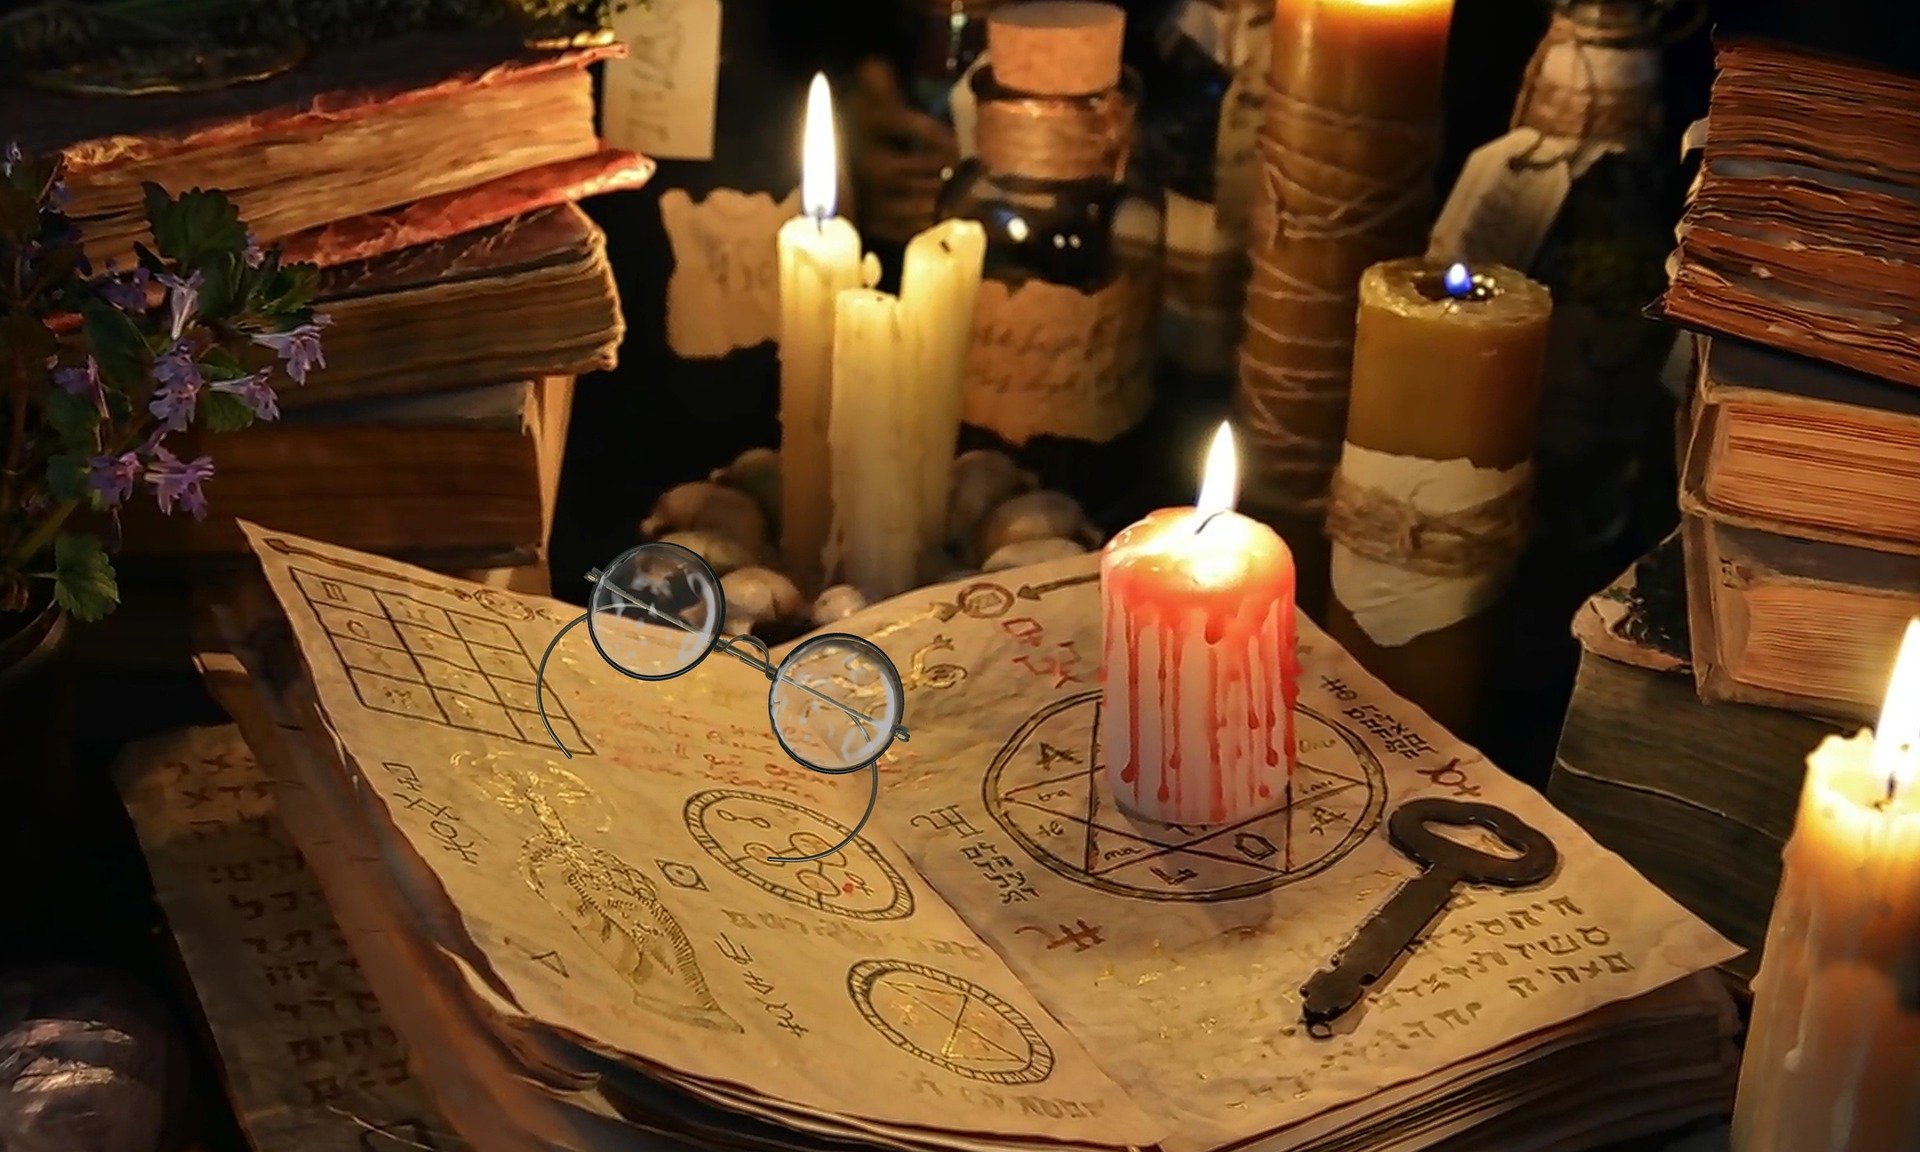 Spooky book open at a page with symbols on it, with a burning candle, old fashioned spectacles and a metal key on top.